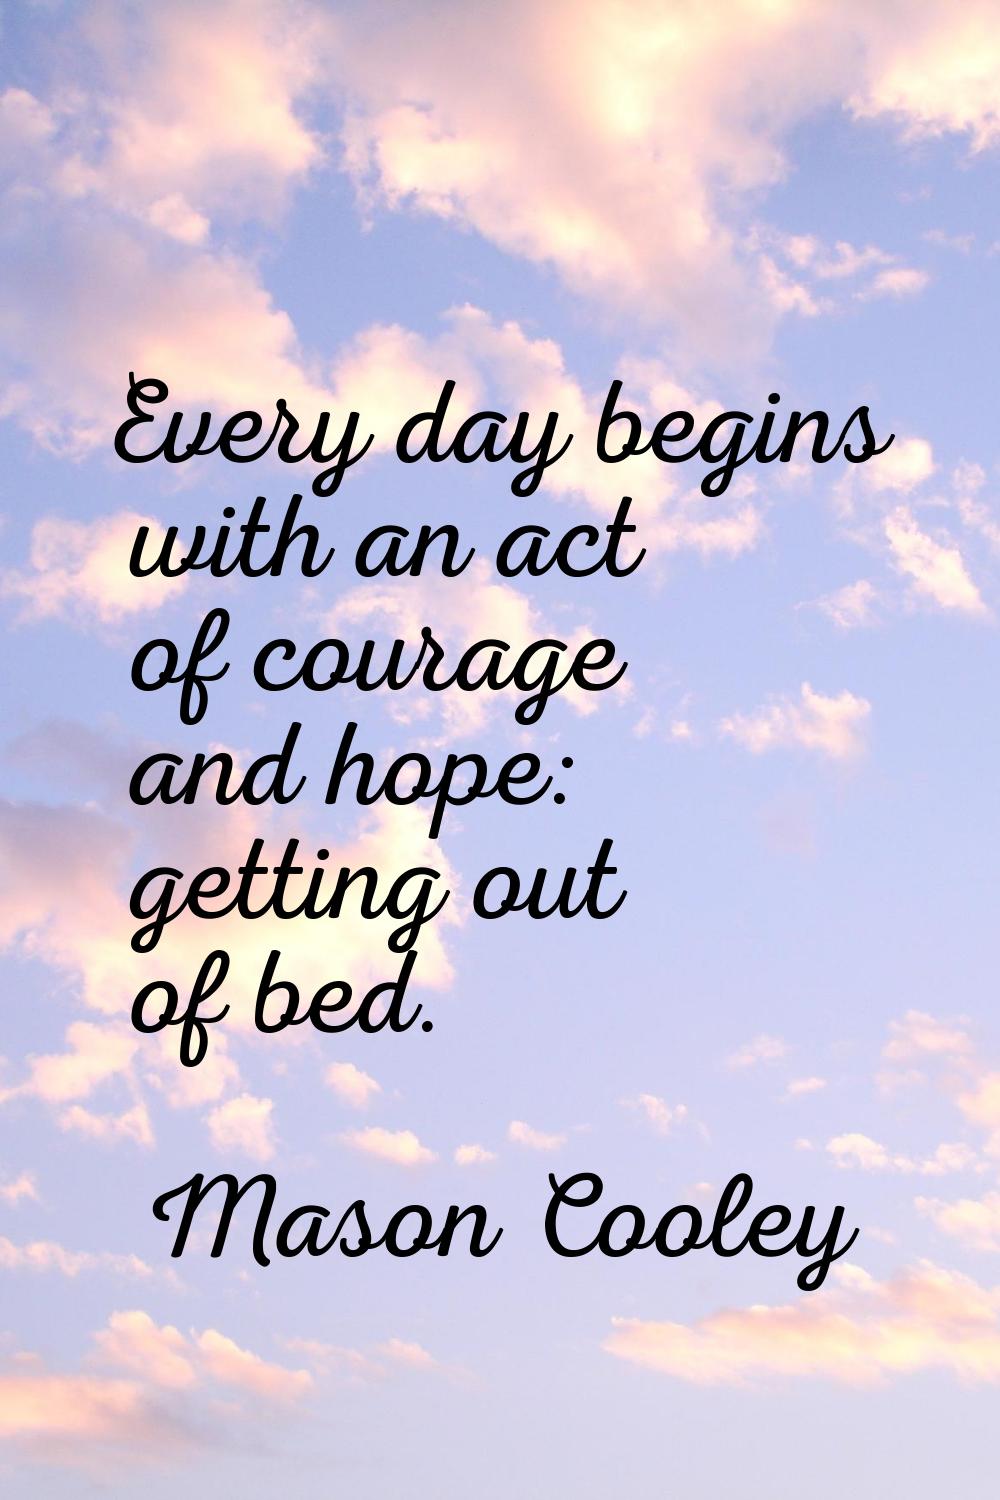 Every day begins with an act of courage and hope: getting out of bed.